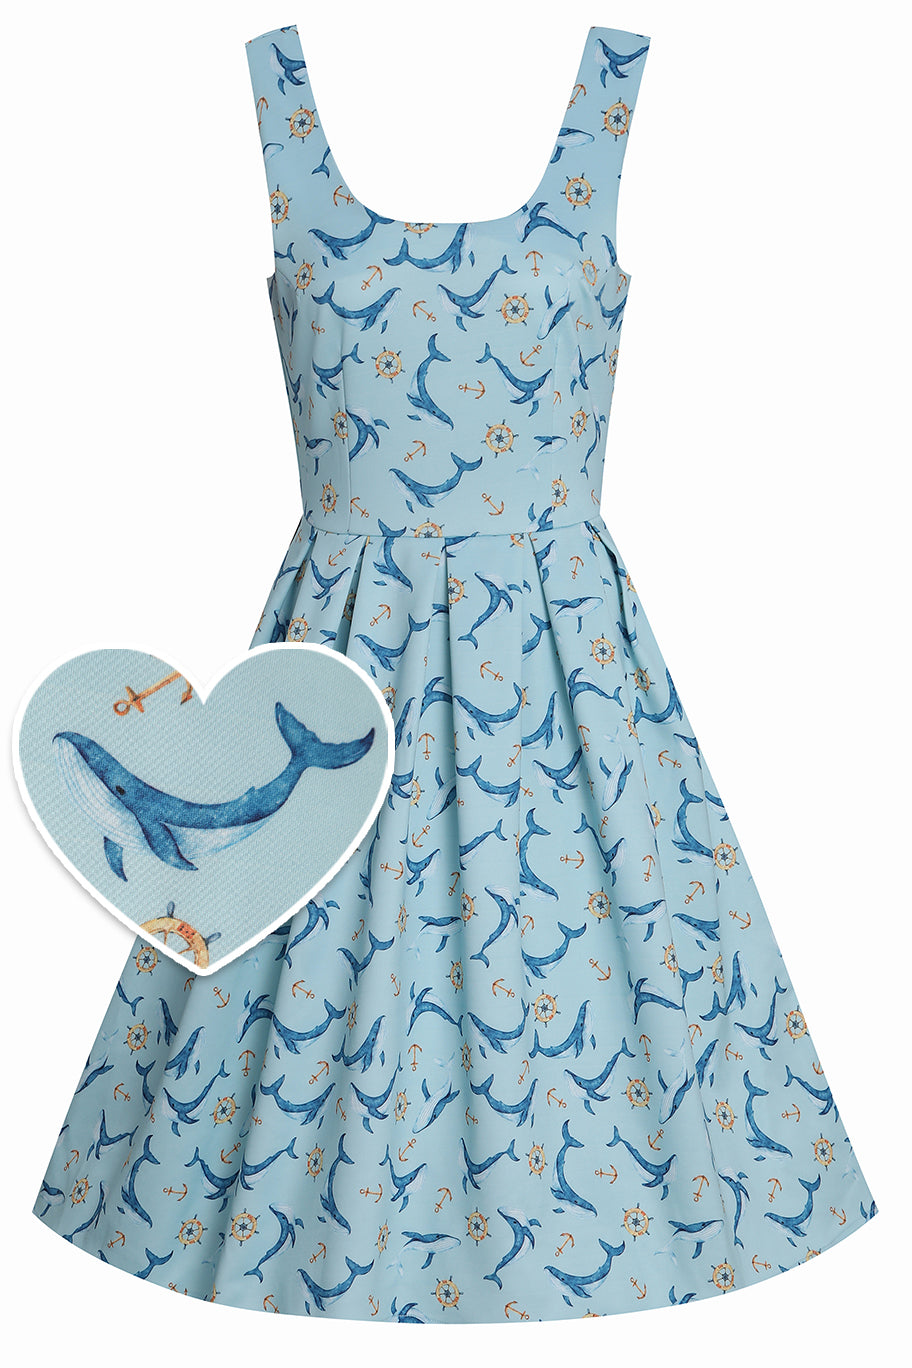 Front view of Dolphin Swing Dress In Aqua Blue